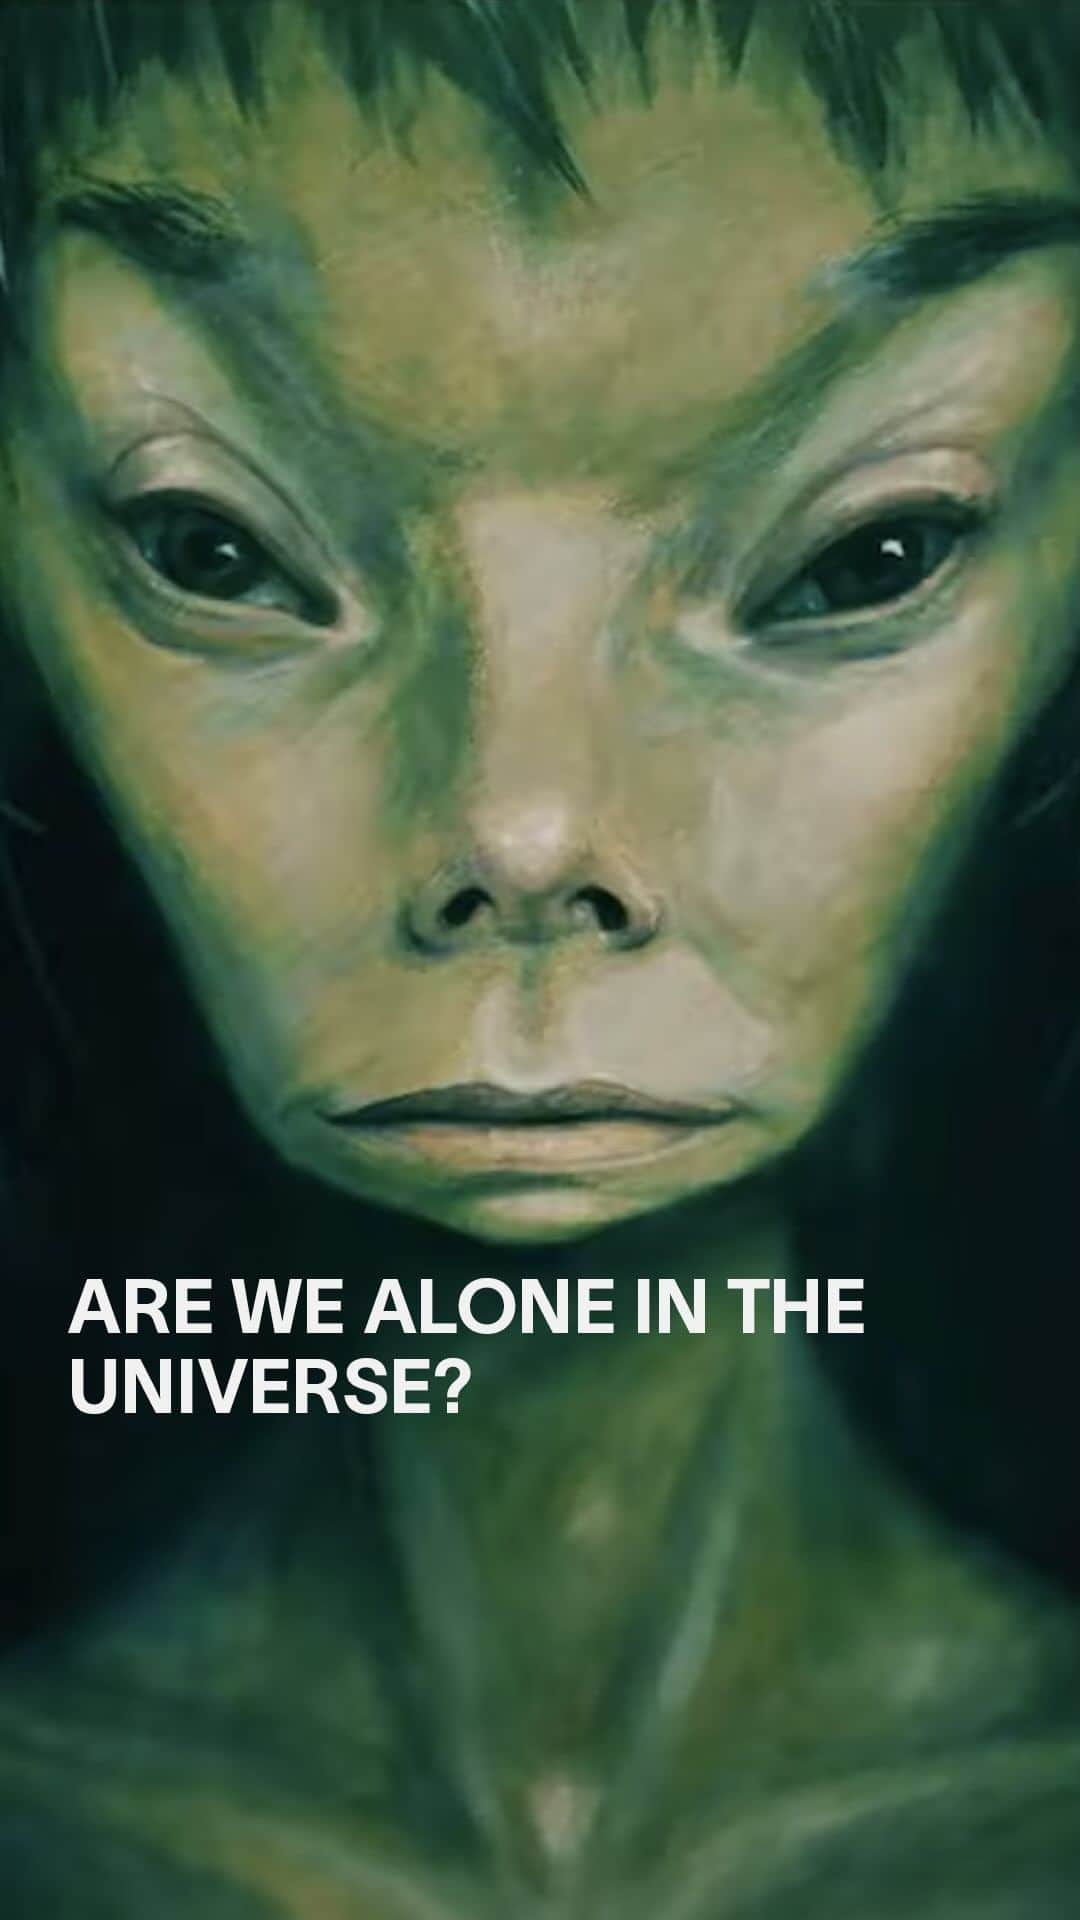 VICEのインスタグラム：「Are we alone in the universe? That tantalizing question is hard to ignore these days, as the Pentagon openly discusses unexplained flying metal orbs and people report unidentified objects in the sky. @motherboardvice is exploring these mysterious events in a new four-part docuseries, Encounters, streaming on Netflix on September 27.」